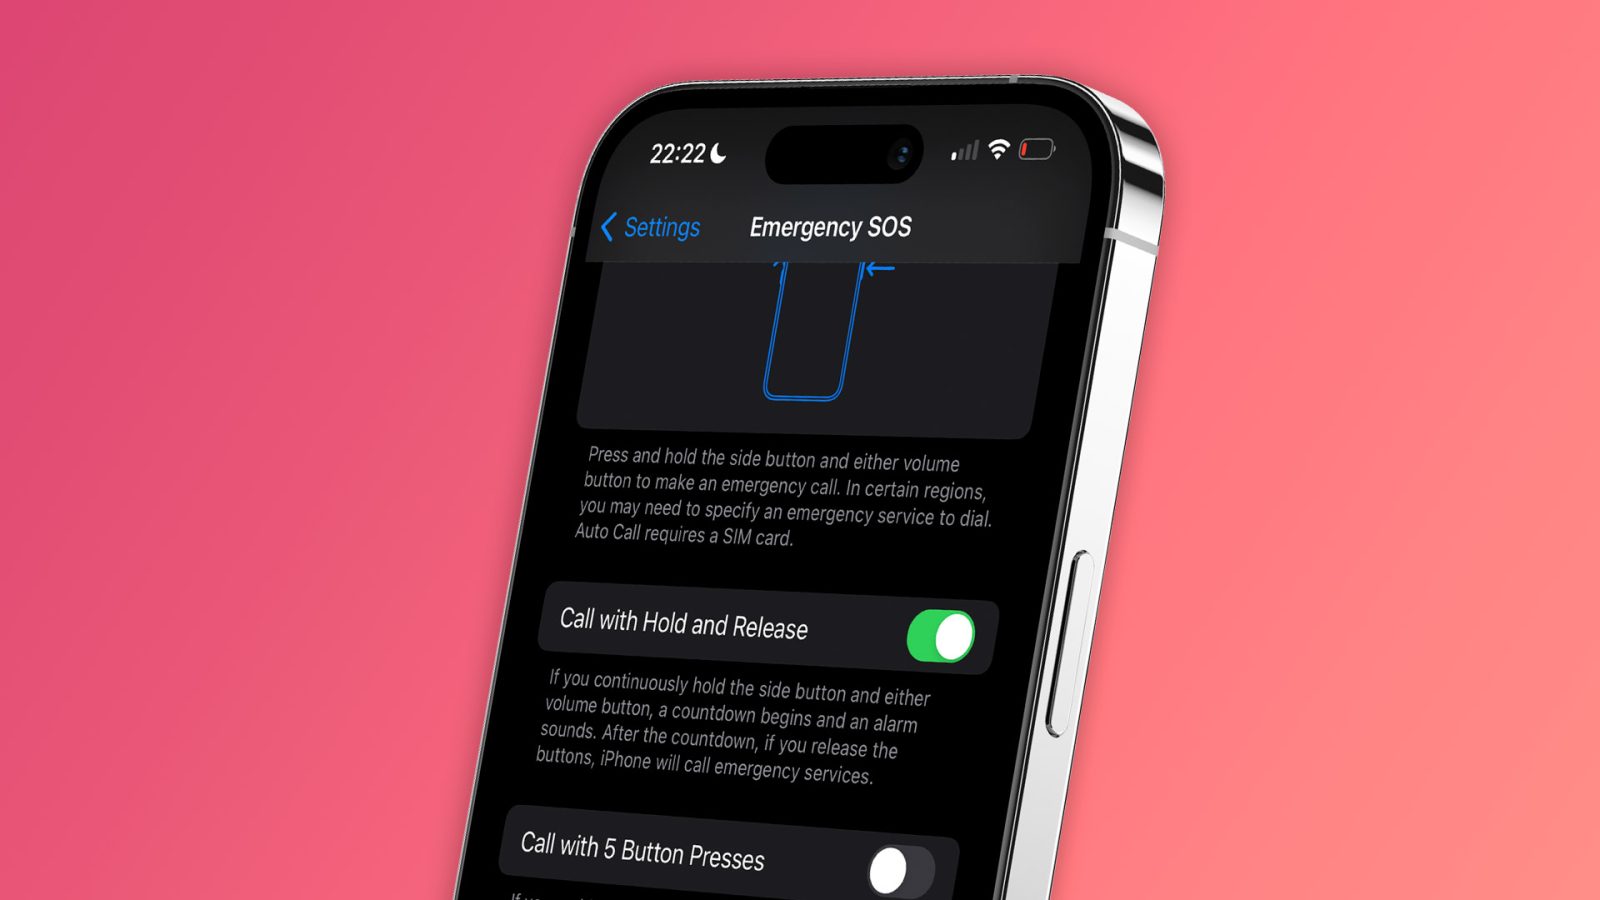 iOS 16.3 beta slightly changes the behavior of the 'Call with Hold' option for Emergency SOS